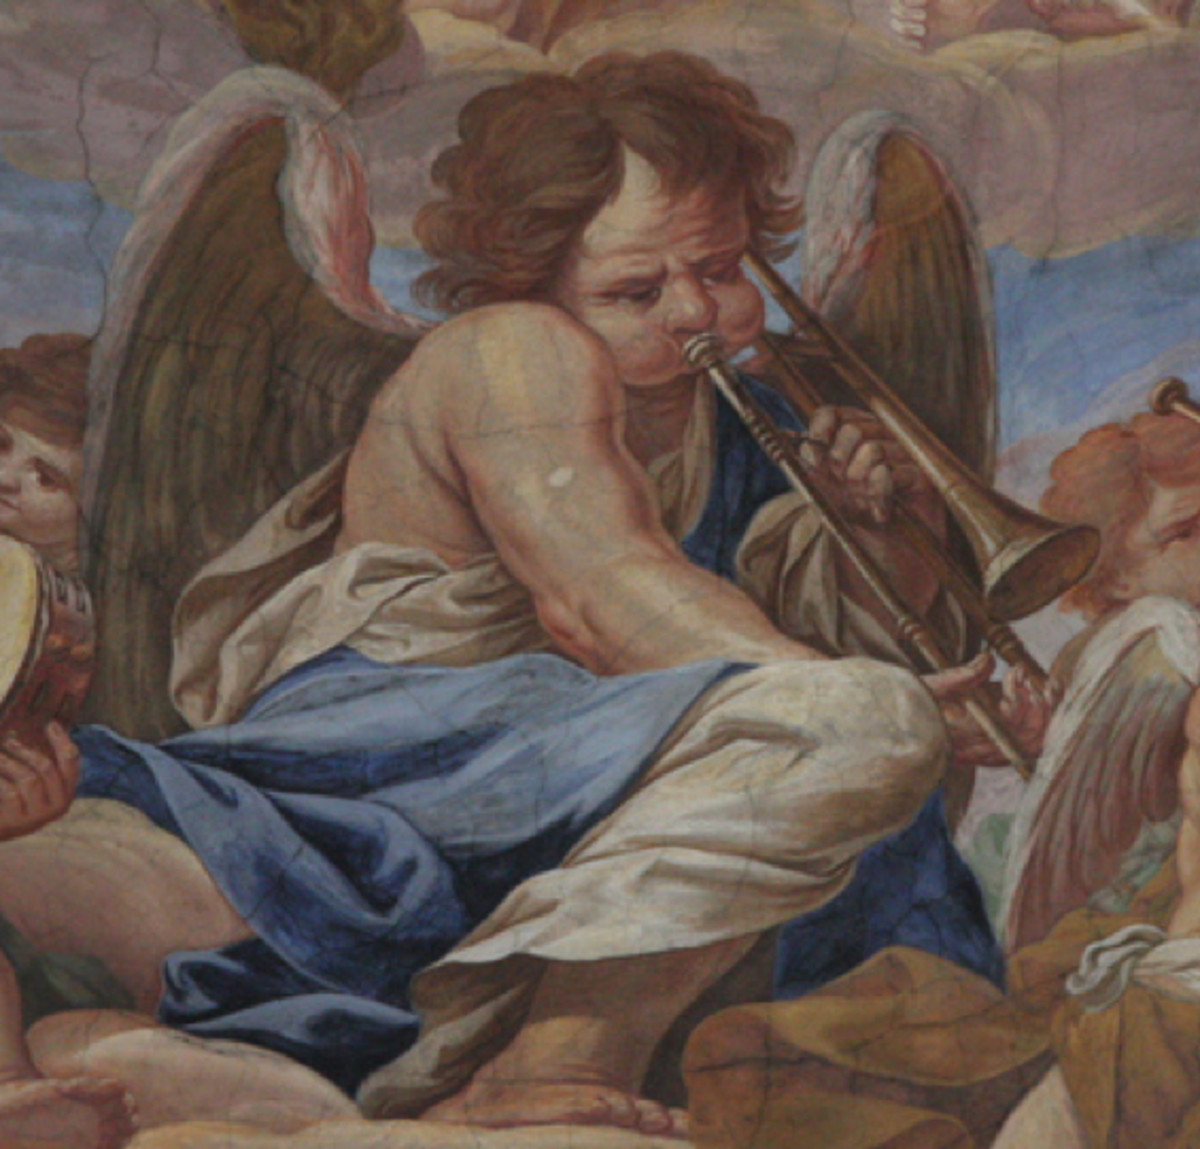 angel-trombonists-throughout-history